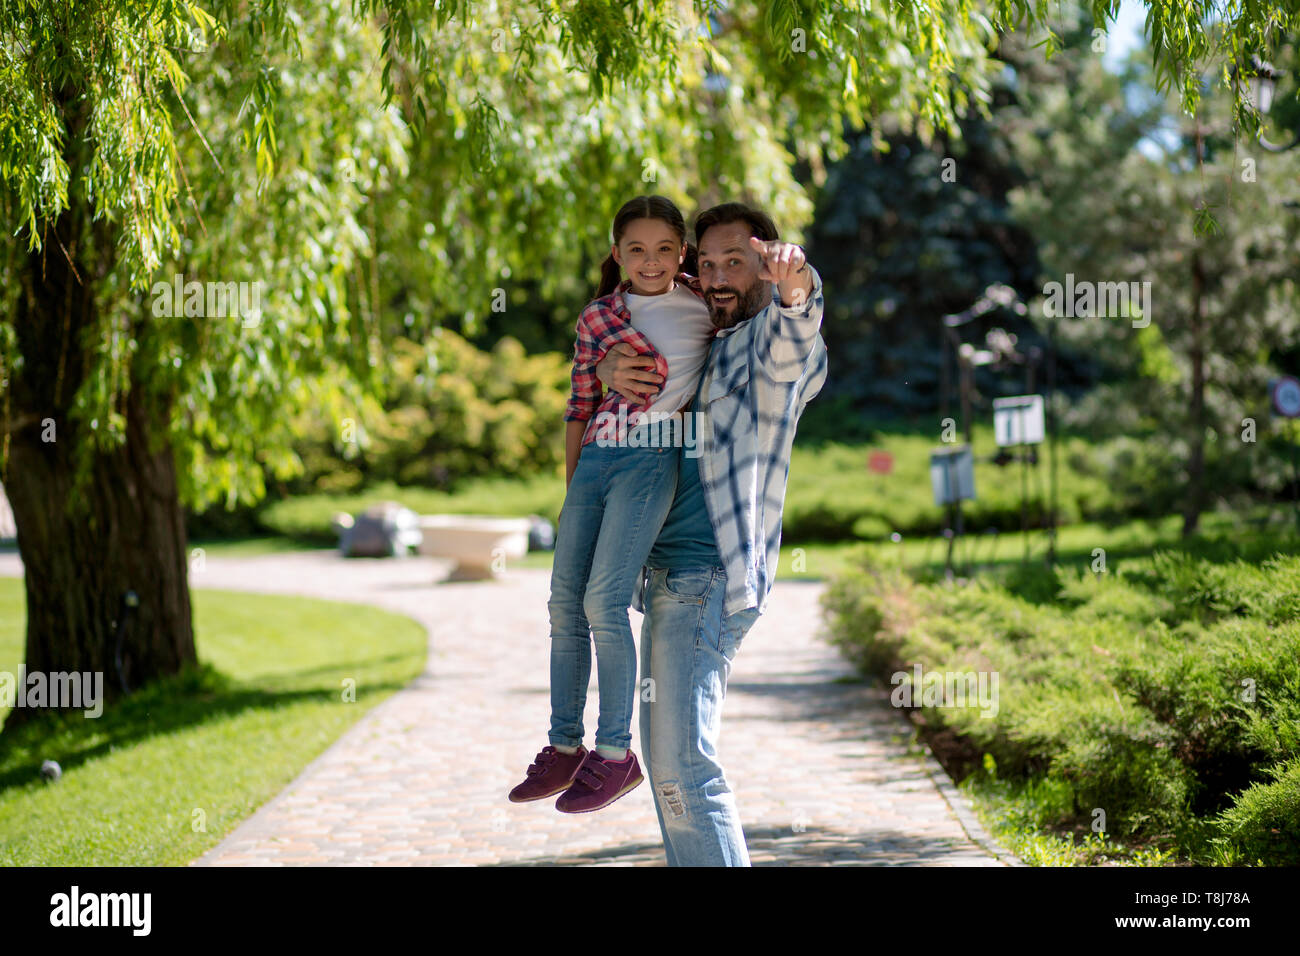 Adorable father and daughter have fun together Stock Photo